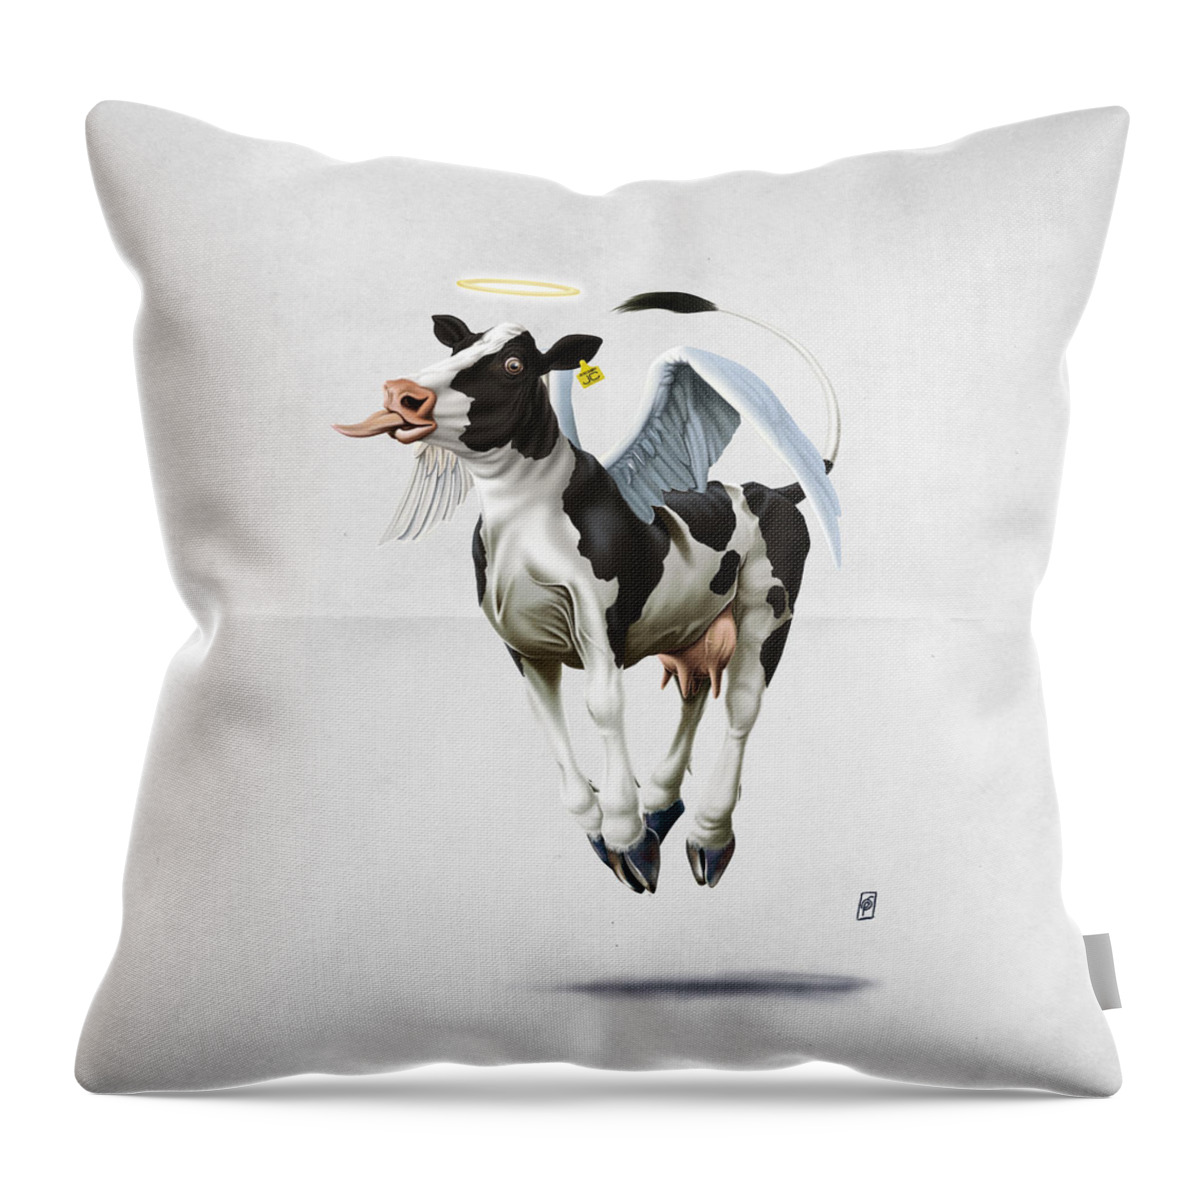 Illustration Throw Pillow featuring the digital art Holy Cow Wordless by Rob Snow